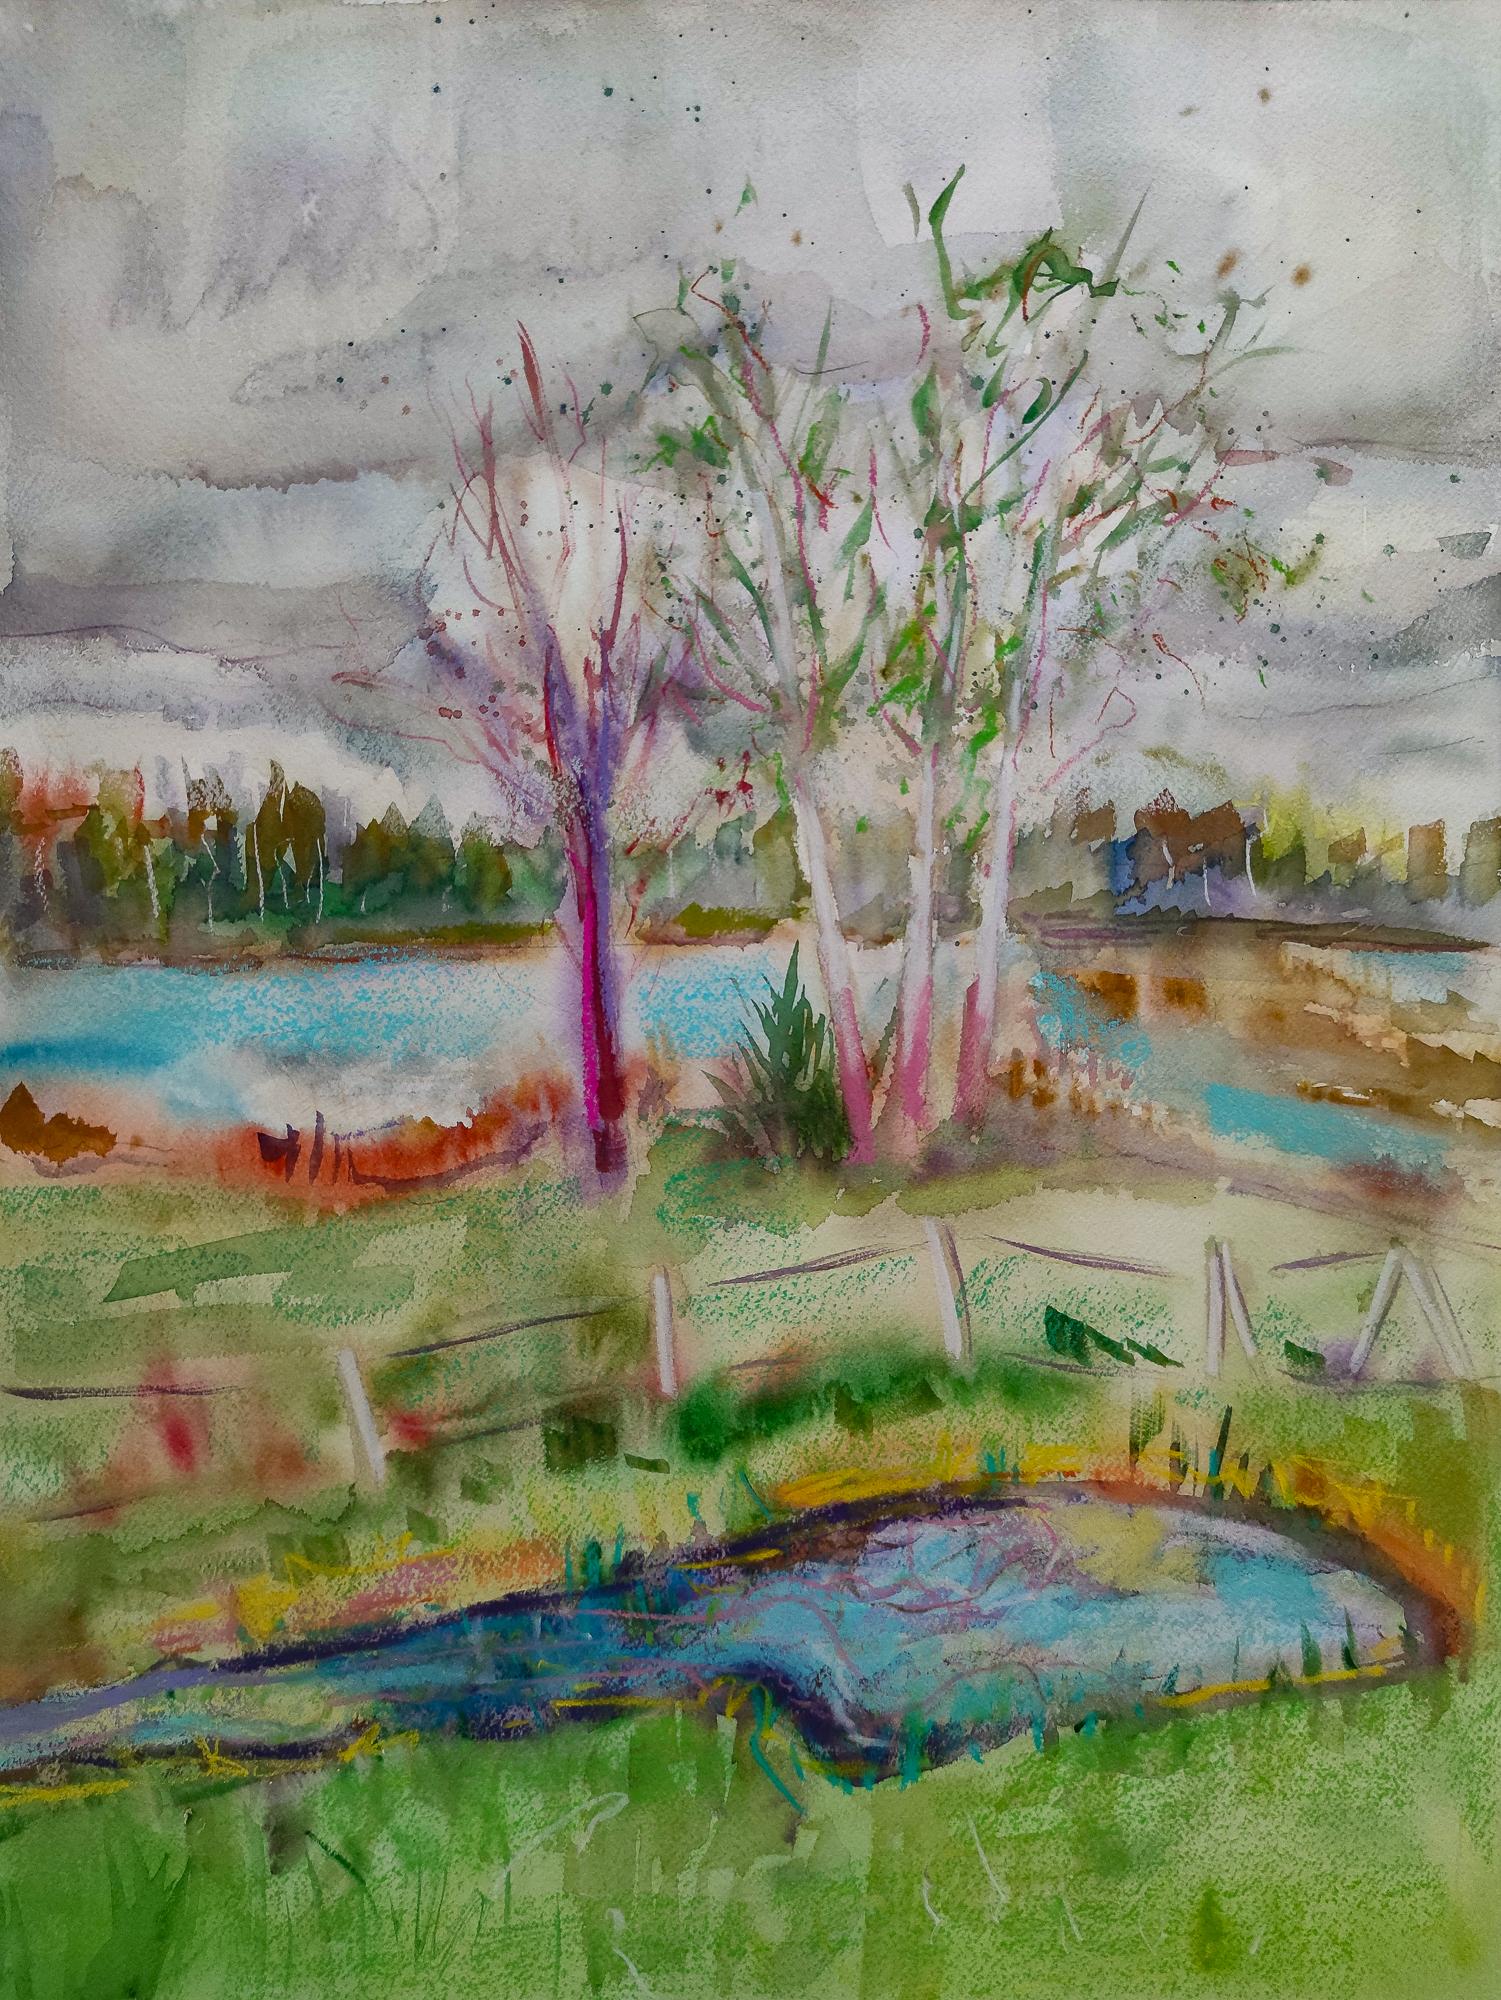 Dyptic around the Episy marshes - Art by Linda Clerget